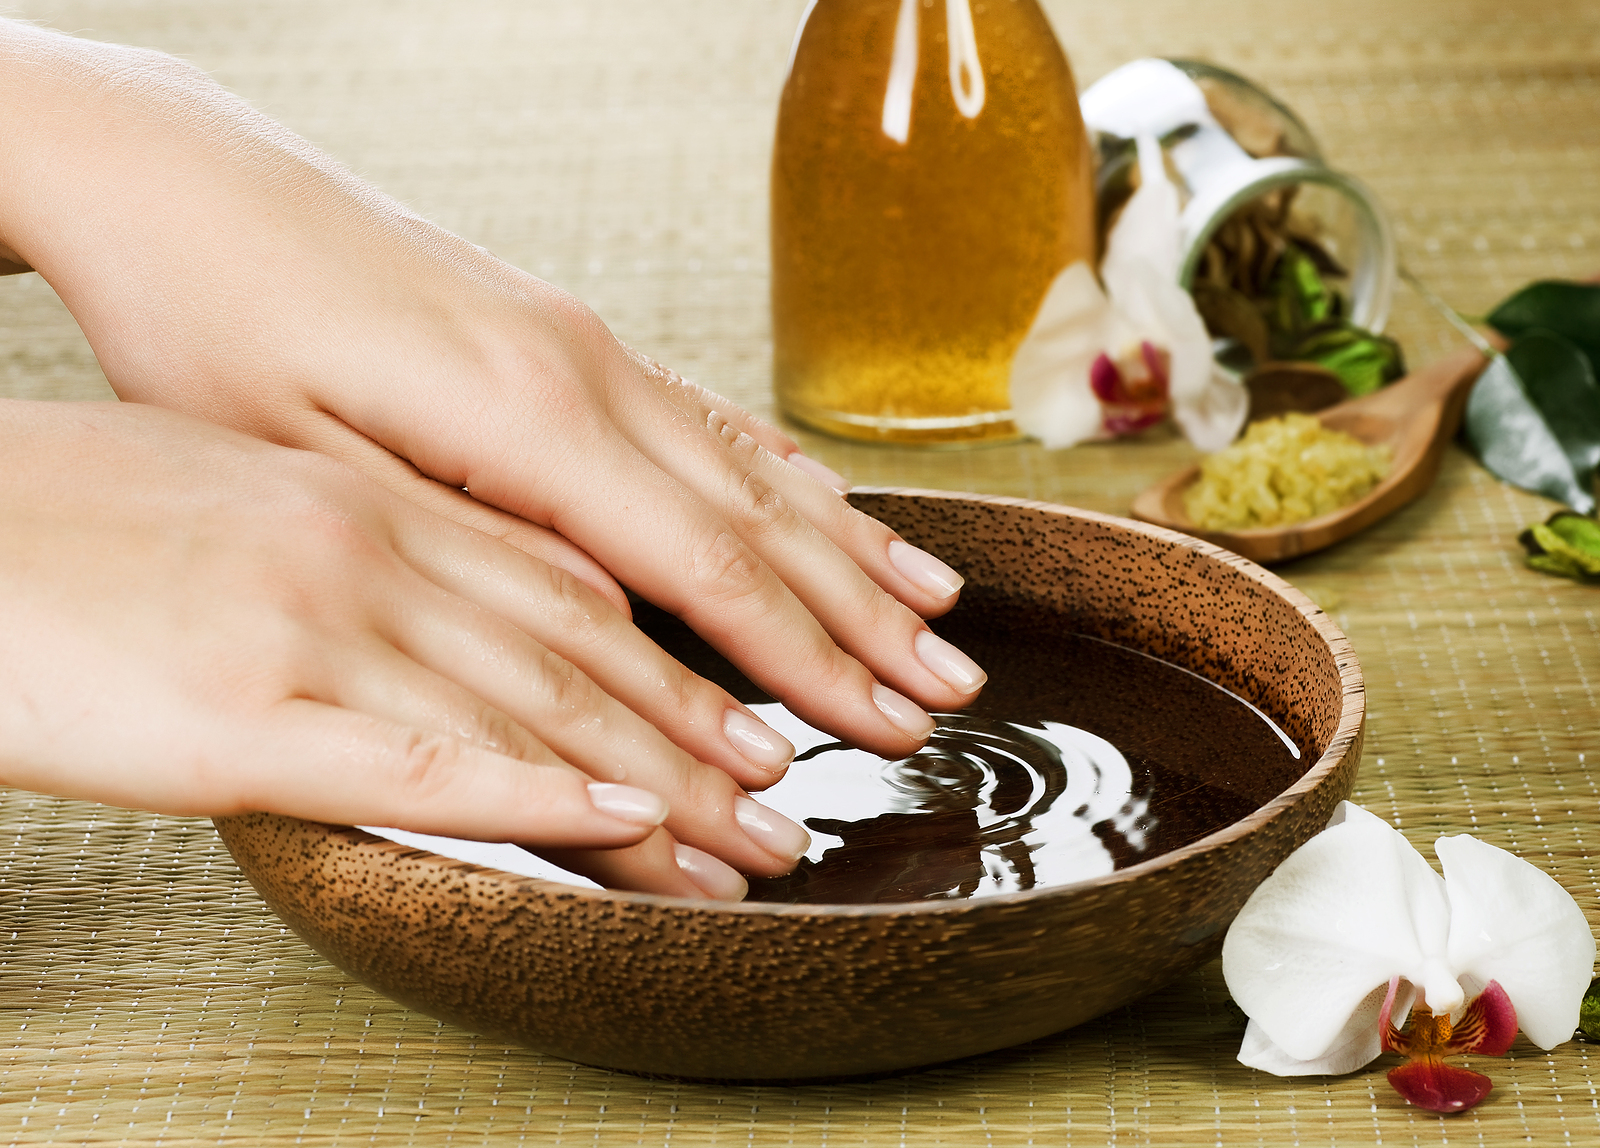 Nail Salon Atlanta Helps You In Taking Care Of Your Nails | Jazmin Spa ...